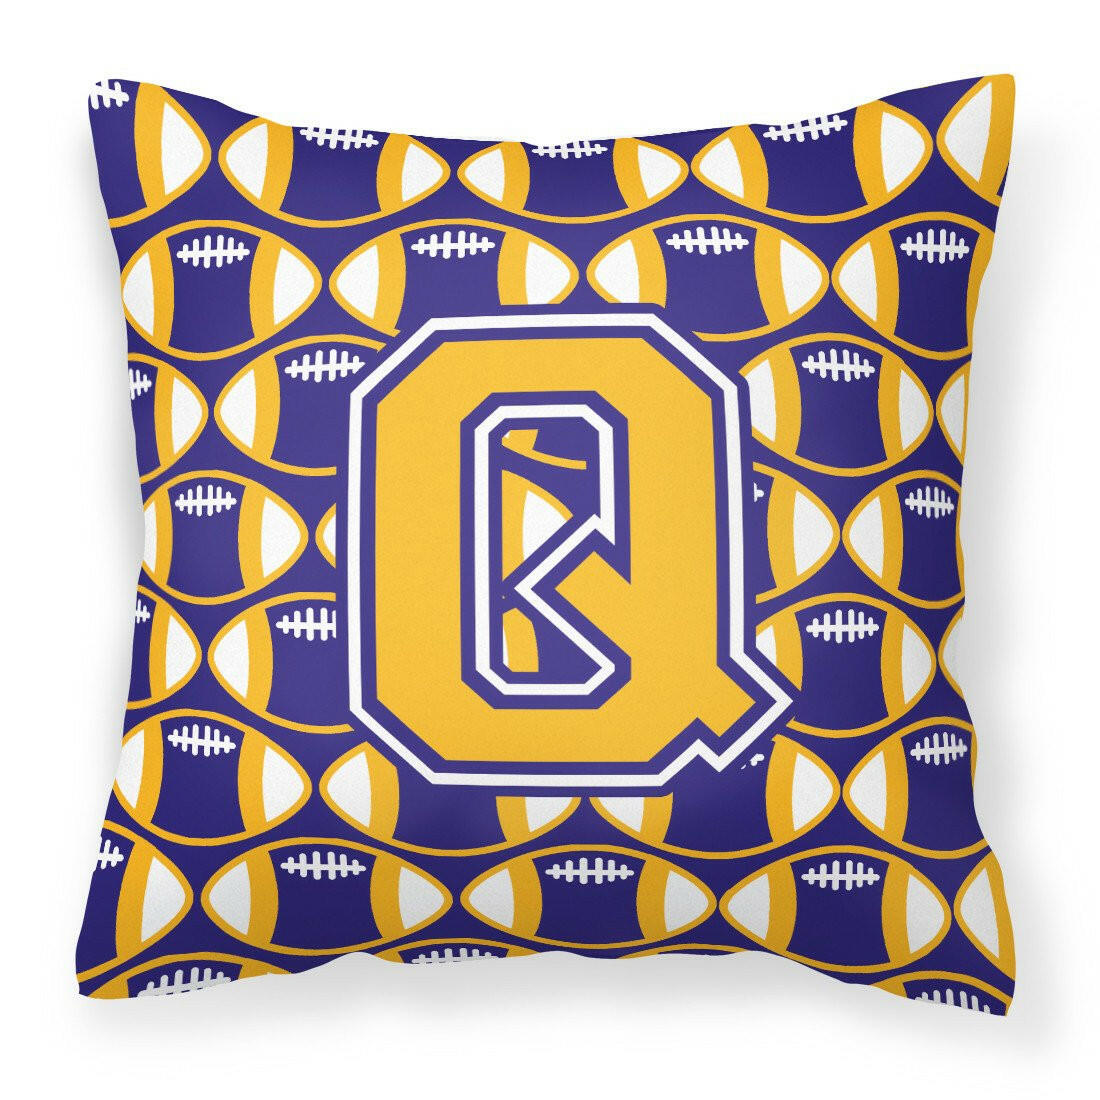 Letter Q Football Purple and Gold Fabric Decorative Pillow CJ1064-QPW1414 by Caroline's Treasures